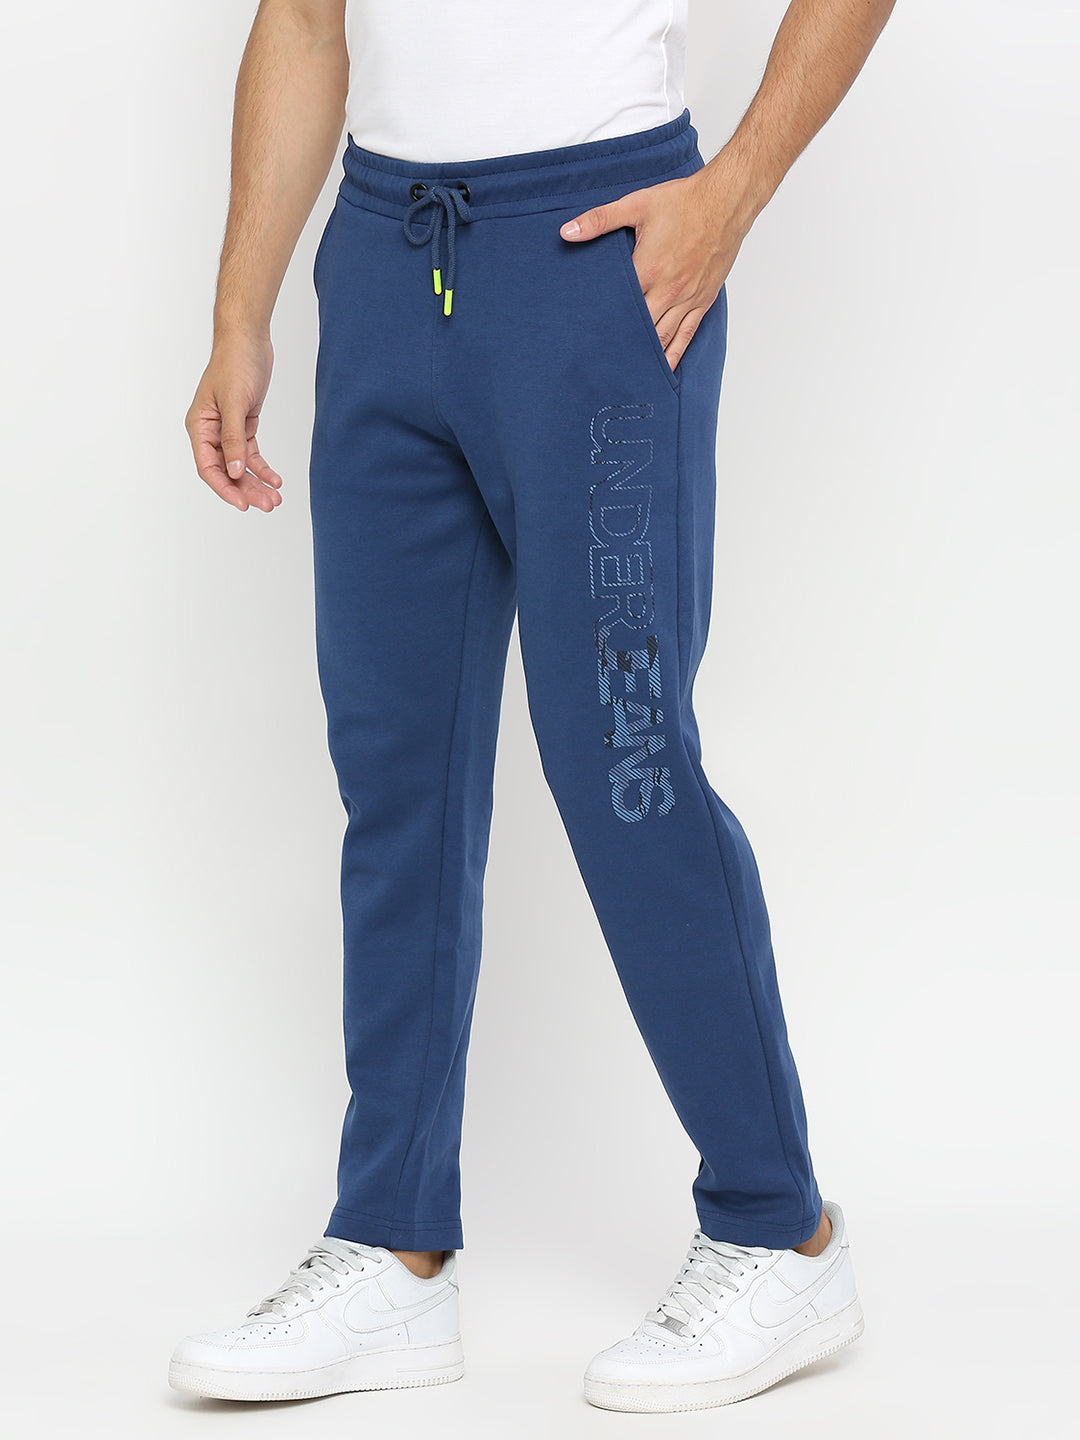 Men Premium Knitted Indigo Blue Cotton Straight Fit Trackpants- UnderJeans by Spykar